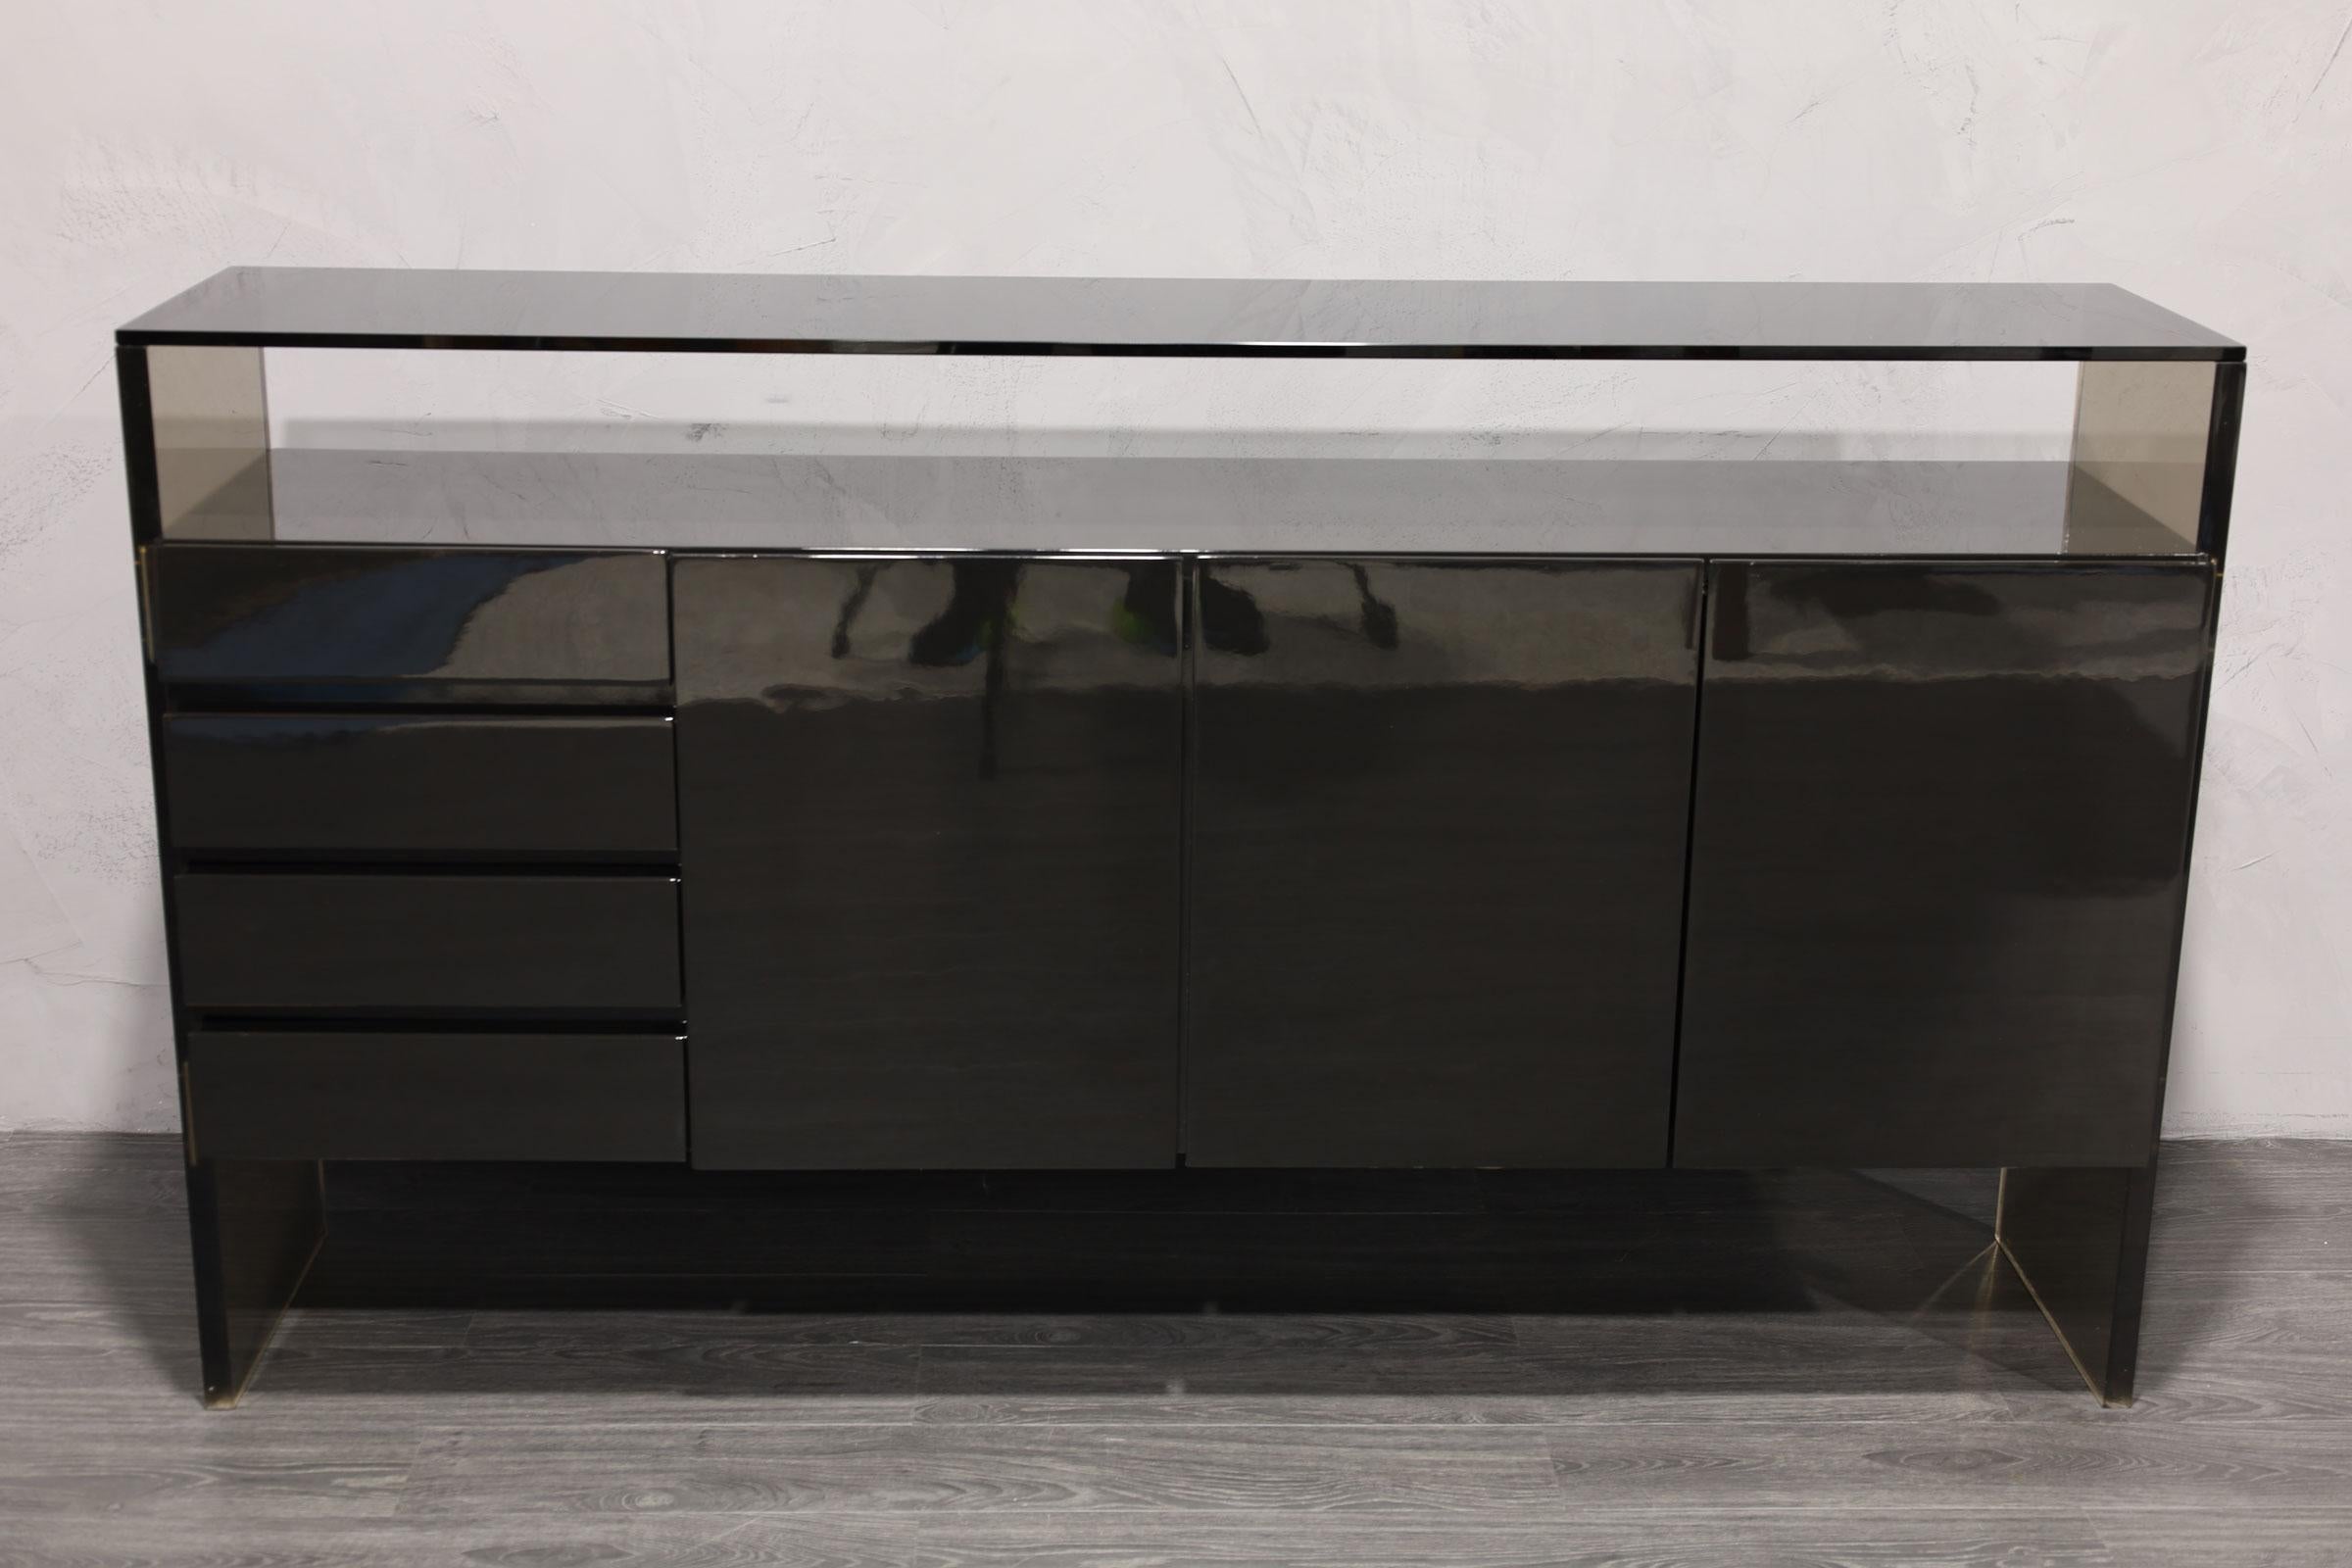 One of his iconic designs, a restored in black lacquer sideboard by Milo Baughman. Sideboard features a floating case piece that includes three doors with shelving and silverware storage. On the left side is four felt lined drawers. The thick Lucite